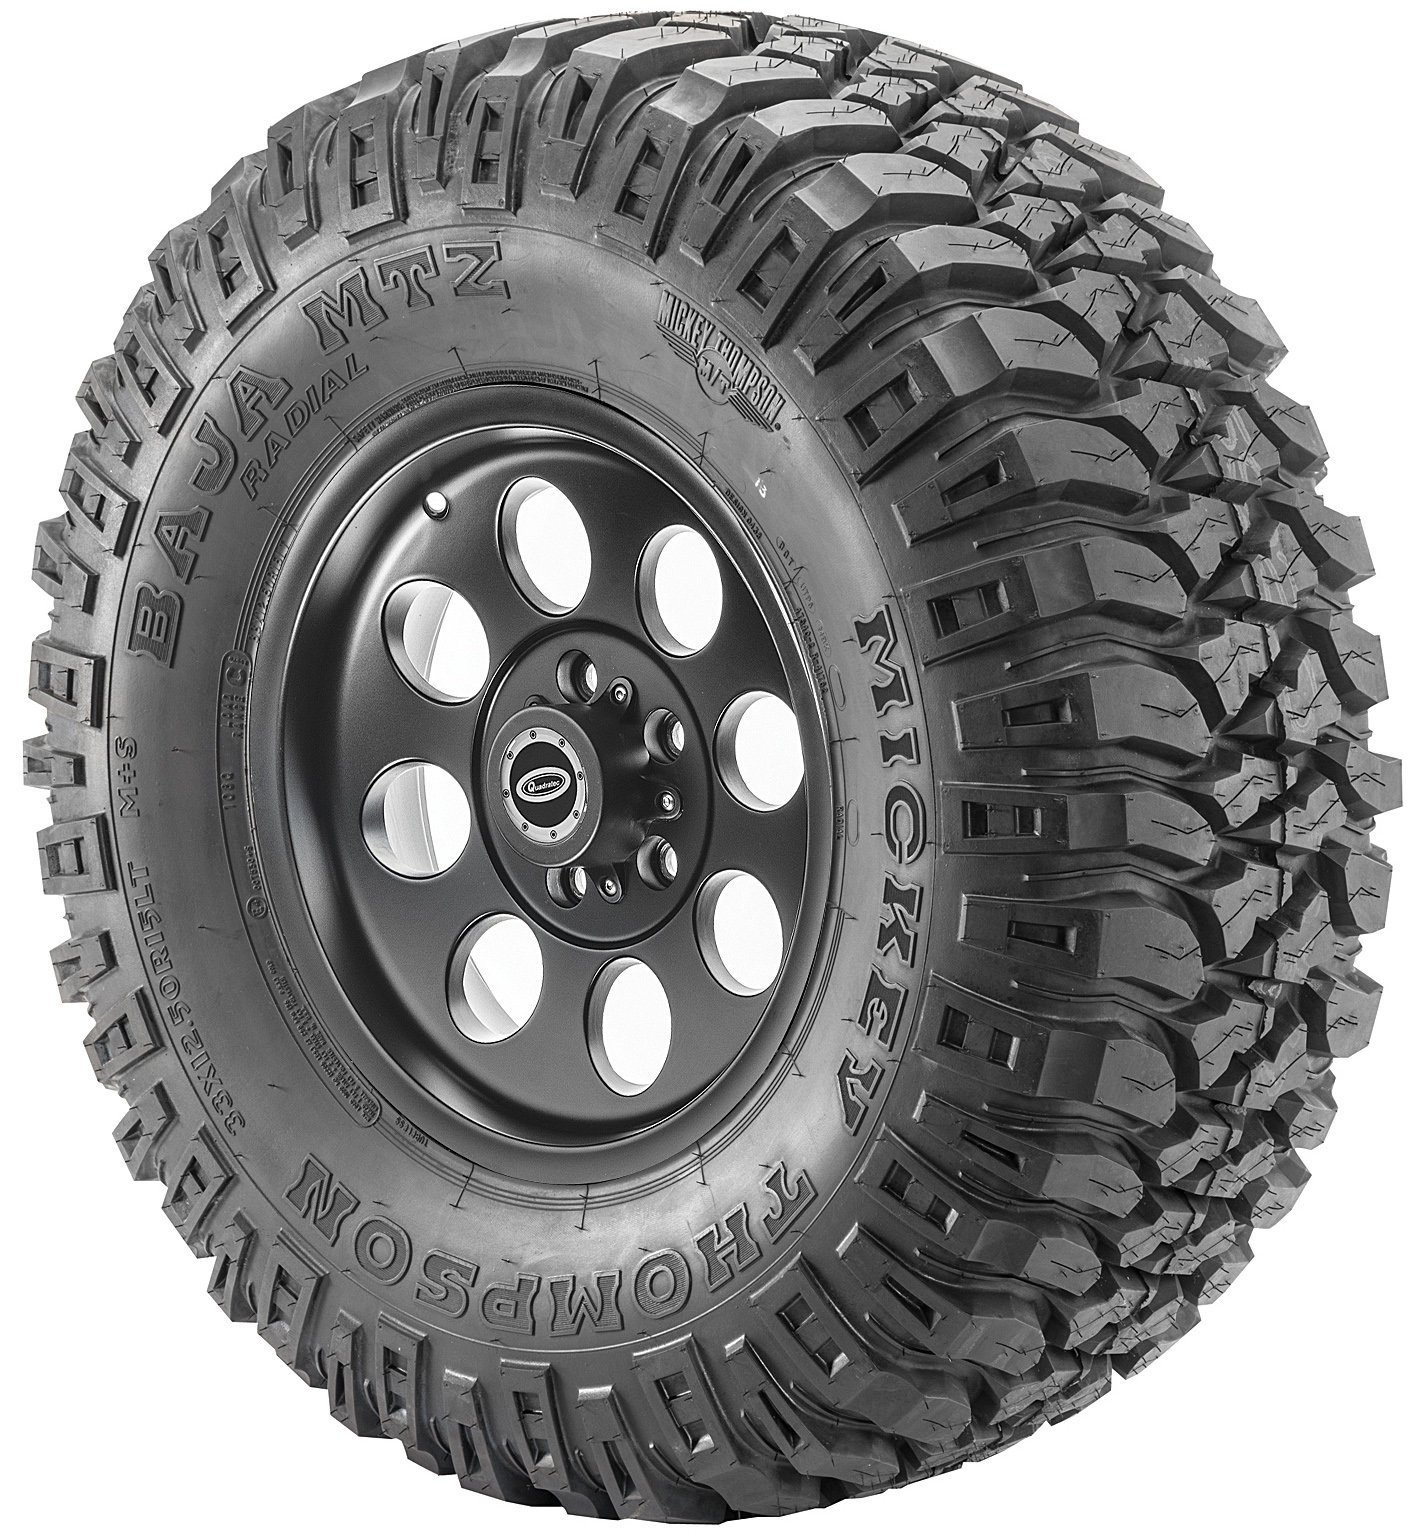 93 jeep wrangler wheels and tires